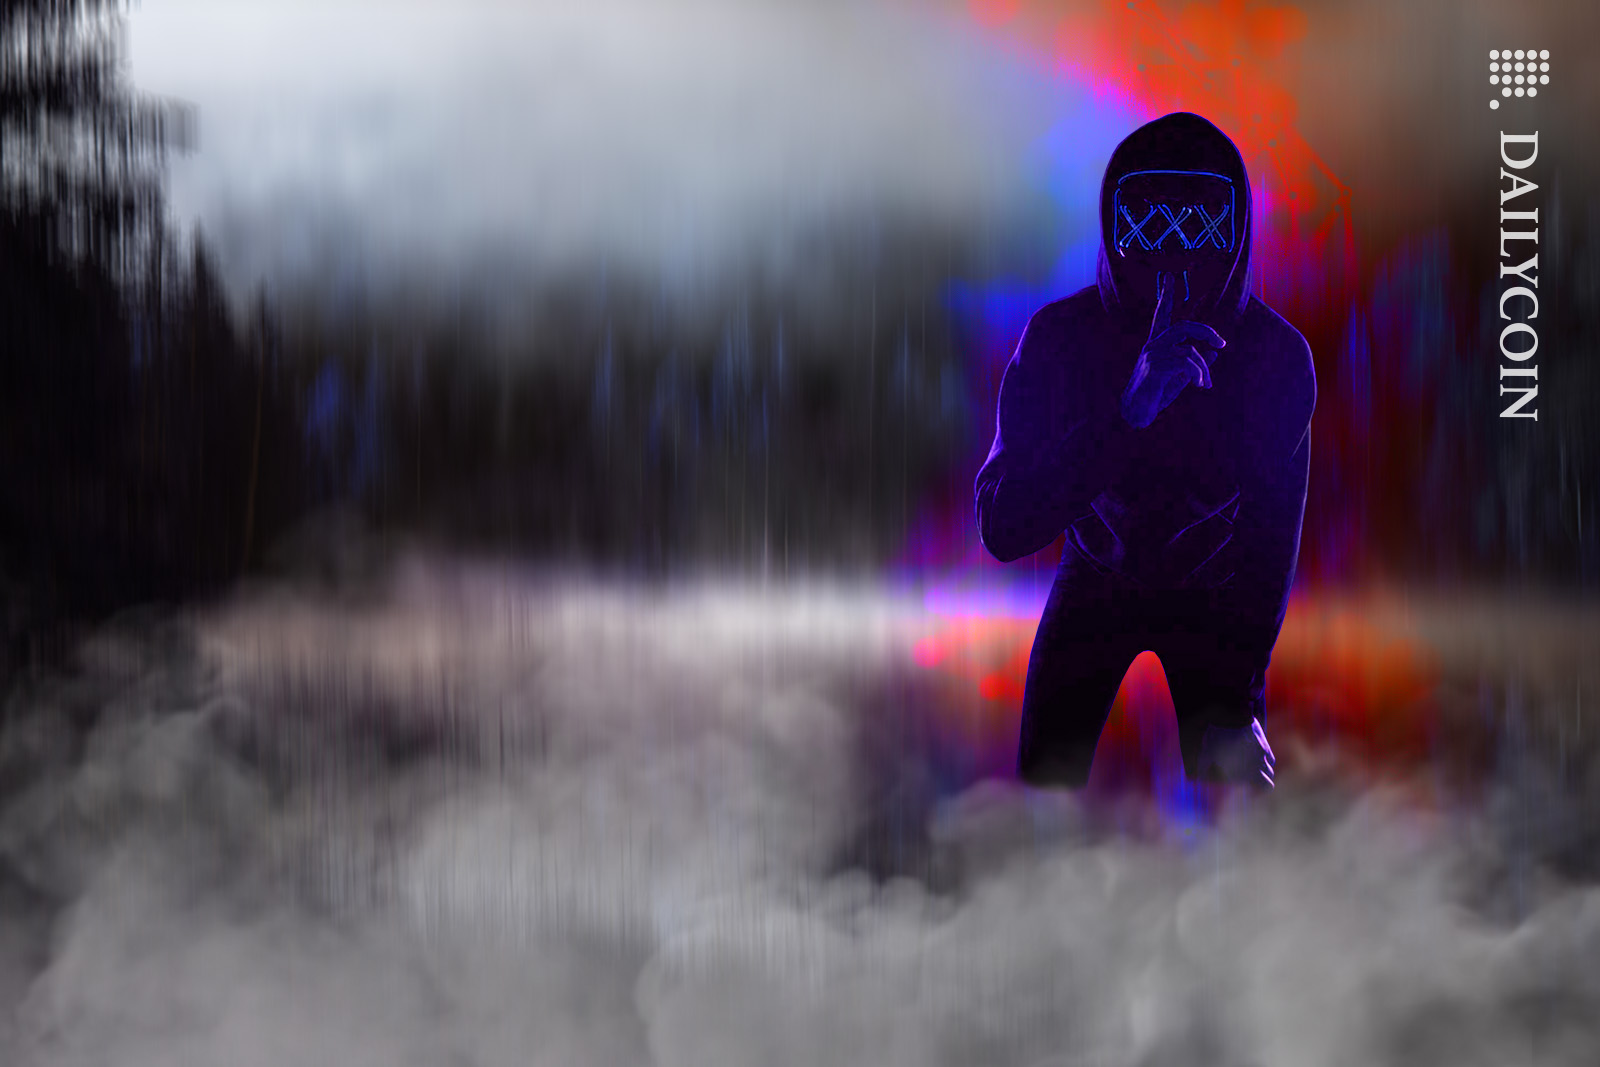 Purple hacker at a misty swamp gesturing hush with finger on lips while red blockchain-shaped smoke coming up behind him.